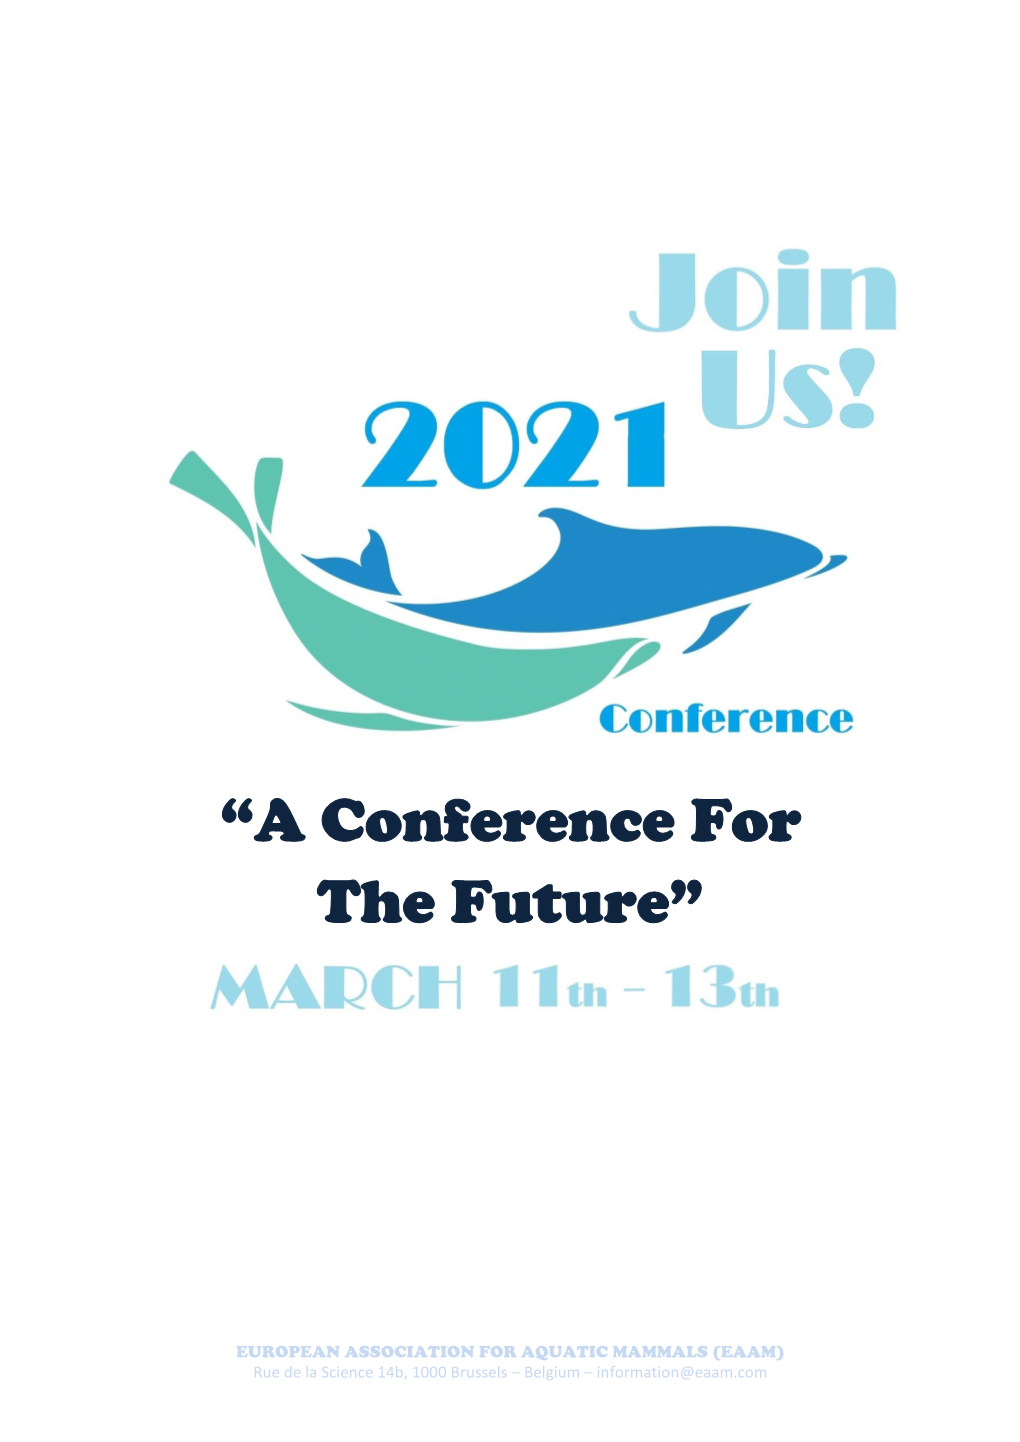 “A Conference for the Future”